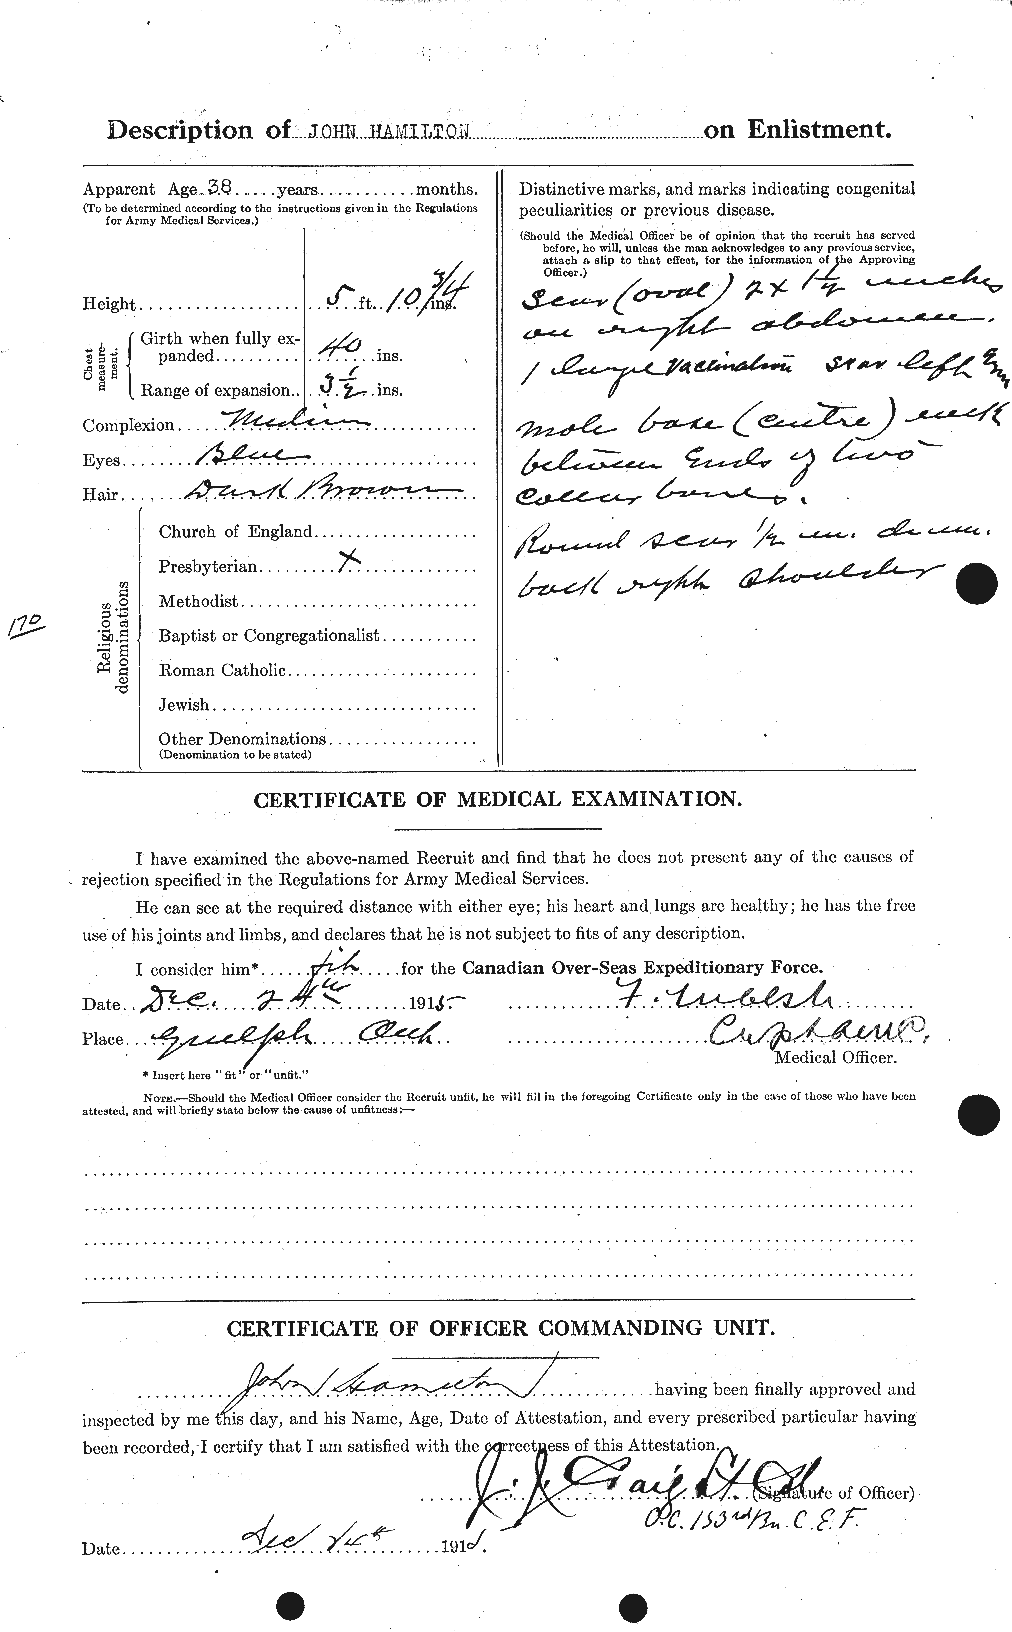 Personnel Records of the First World War - CEF 373050b